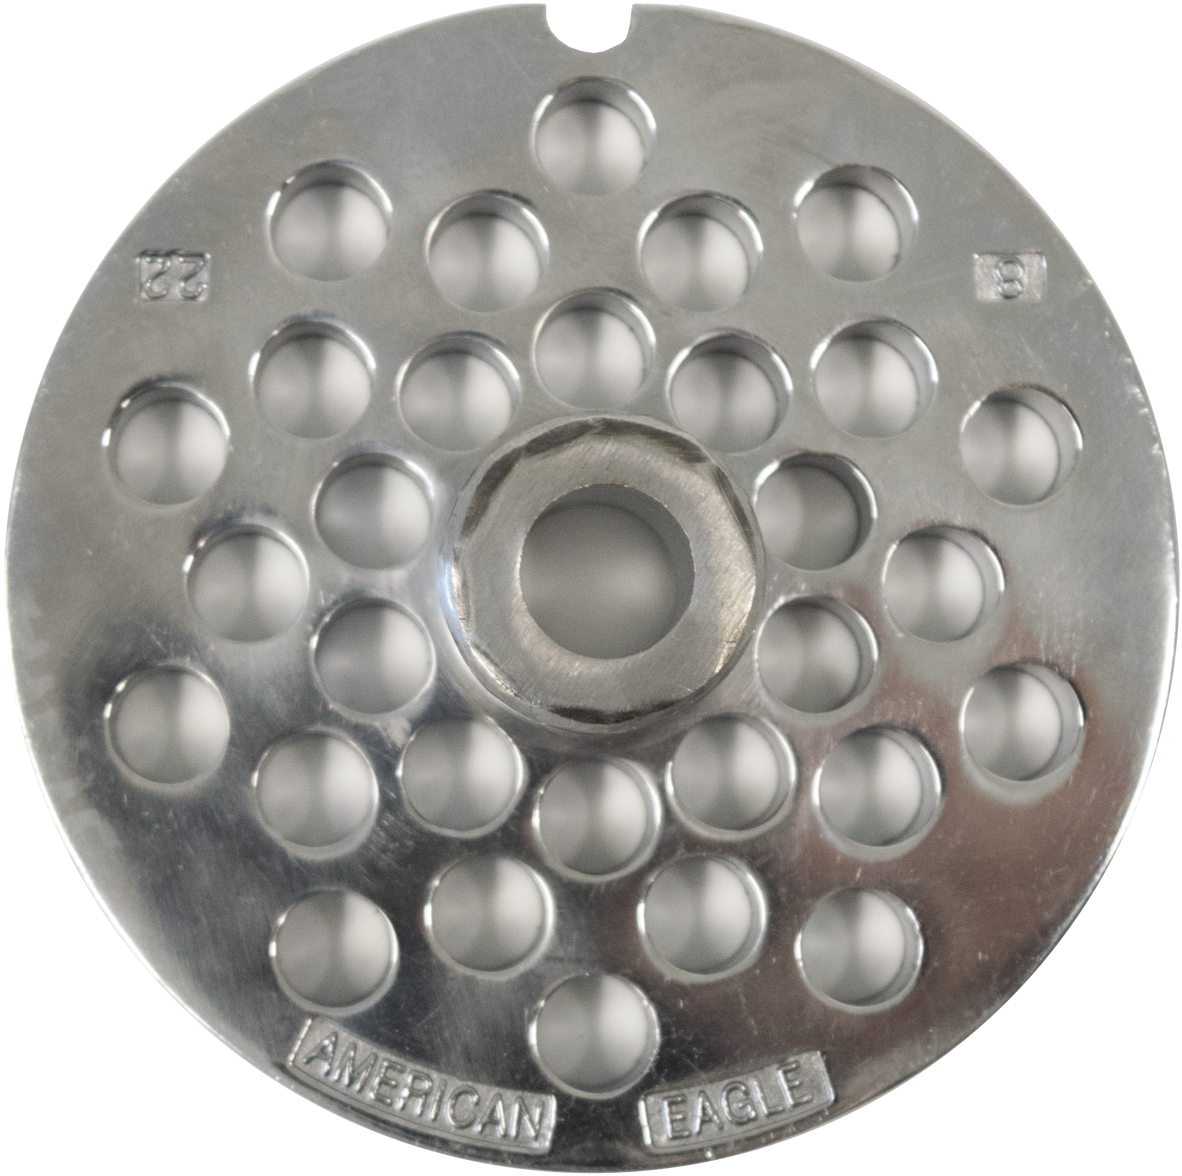 A Circular Metal Object With Holes